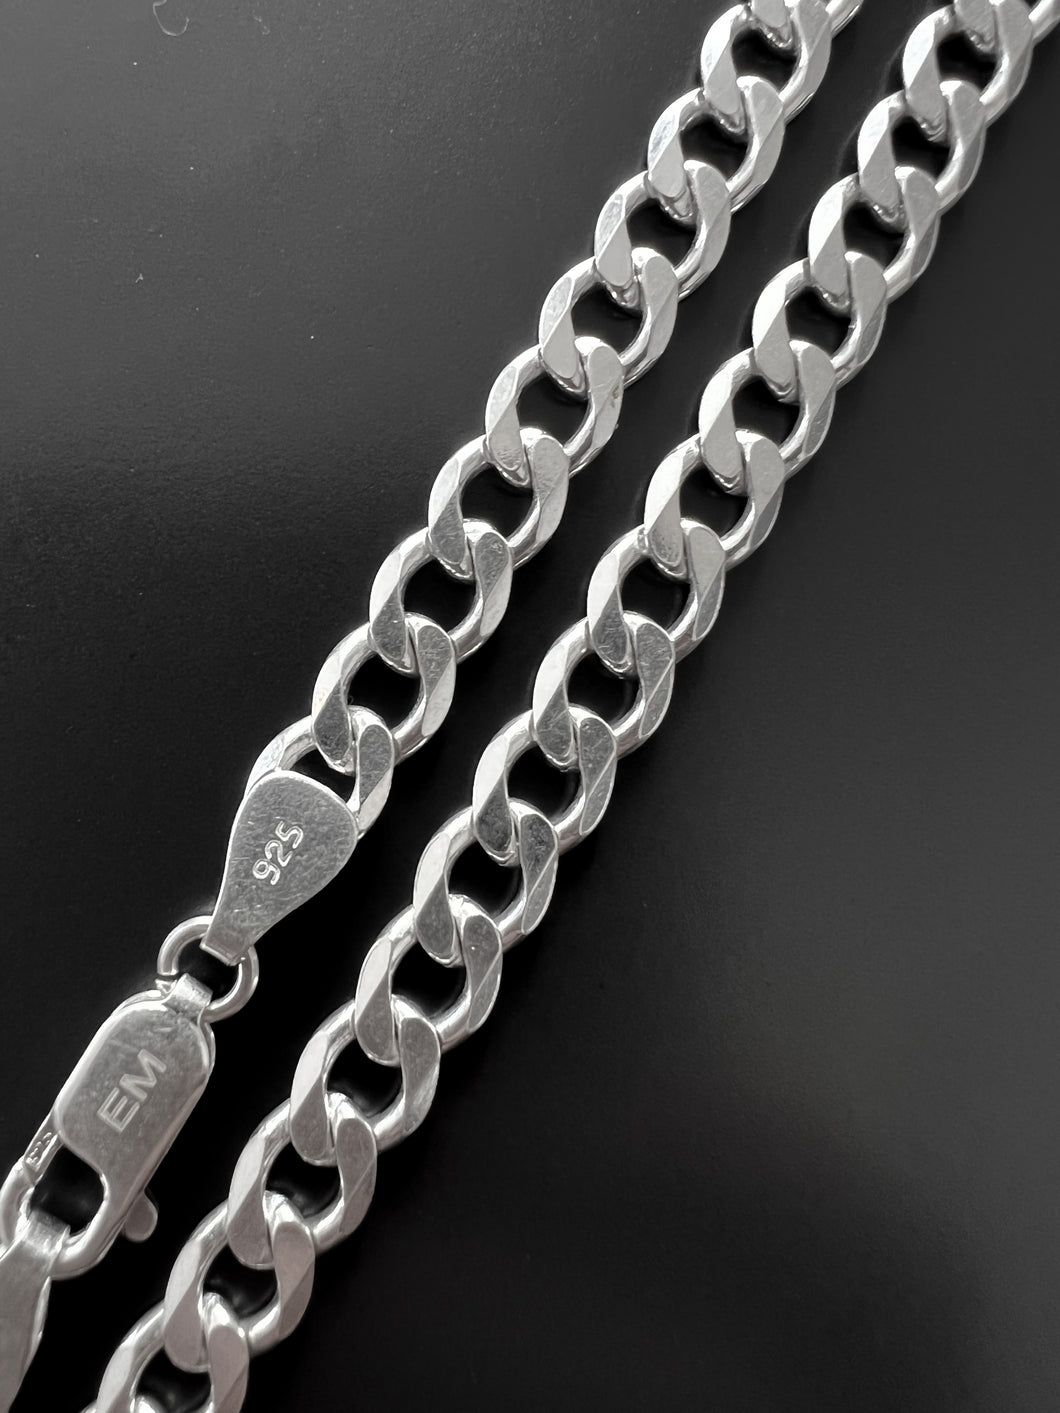 Solid Sterling Silver Curb Chain